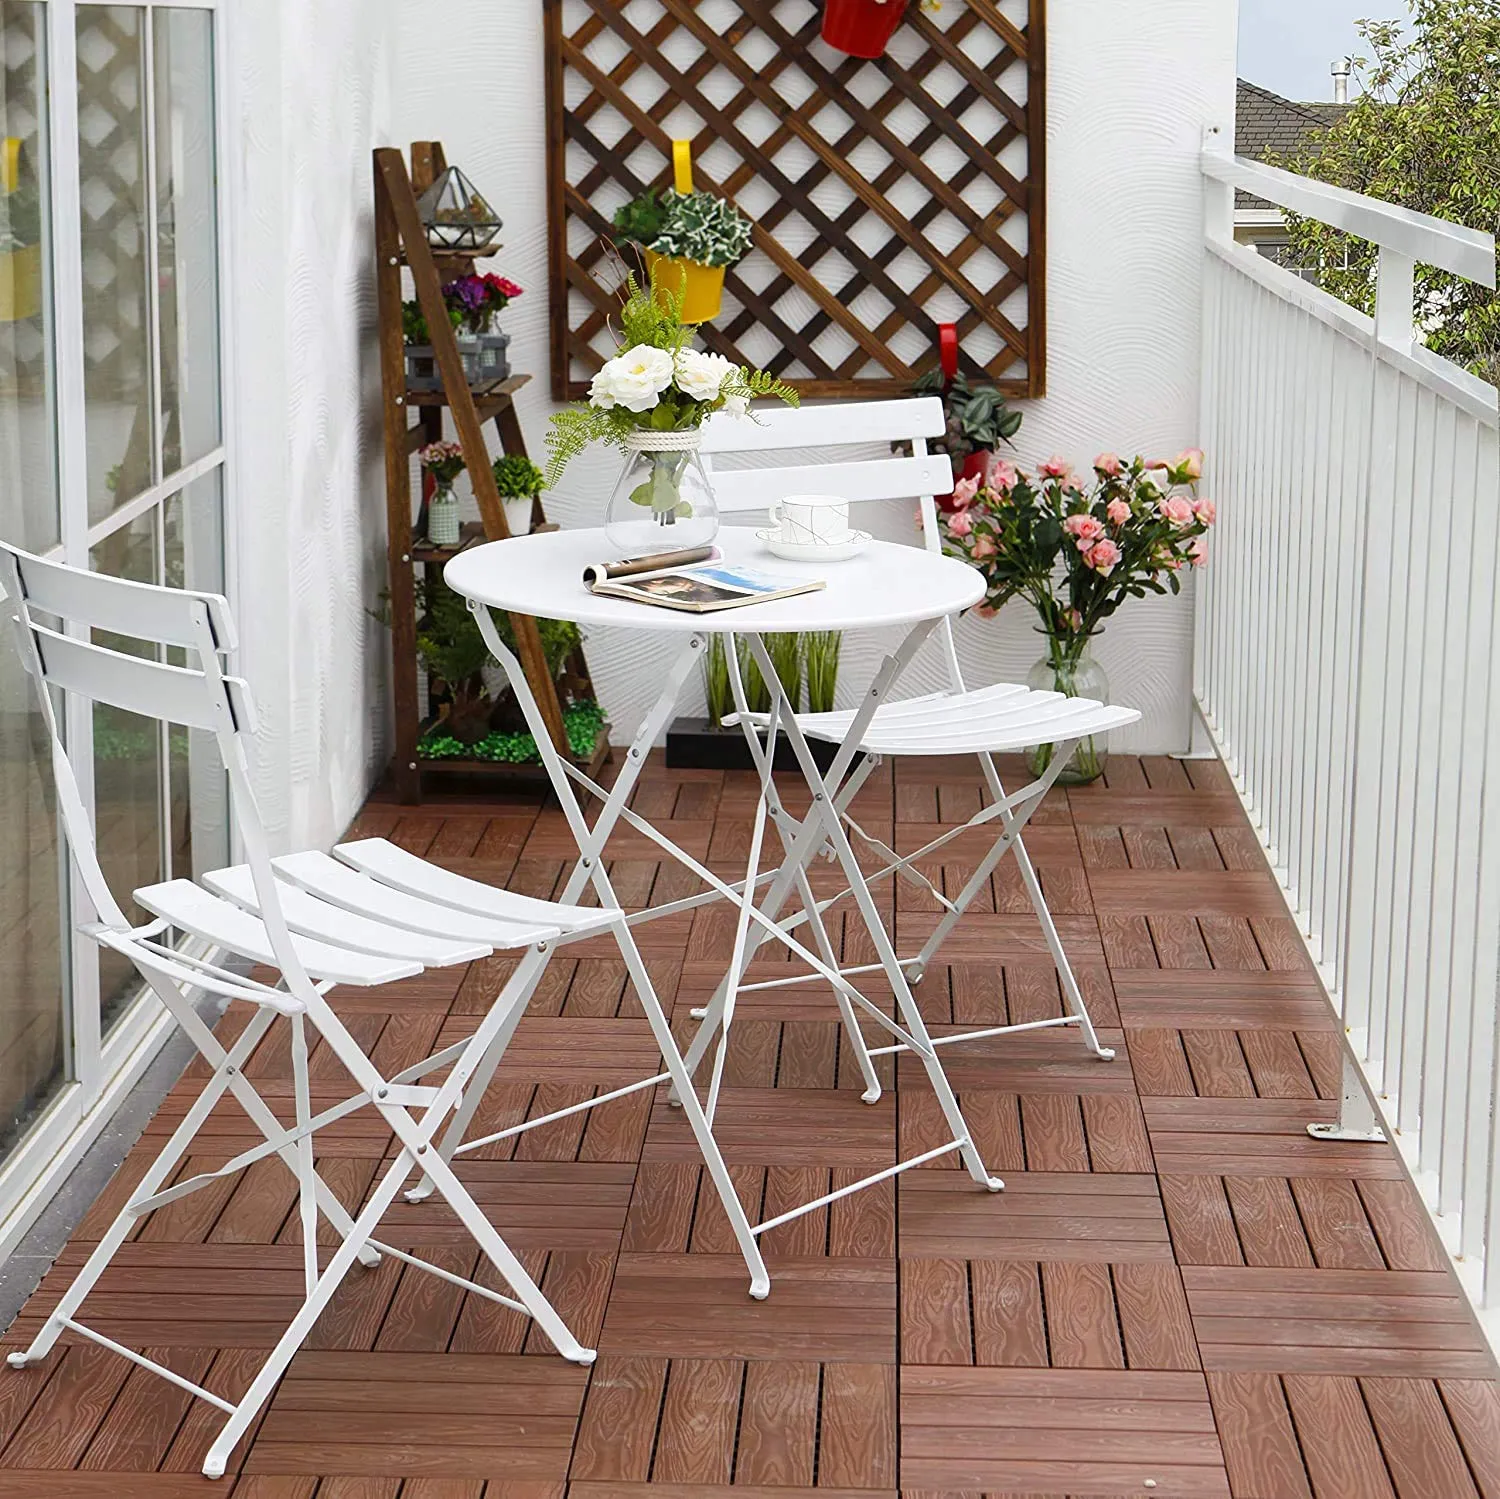 3-Piece Powder-Coated Iron Bistro Set of Foldable Garden Table and Chairs in White